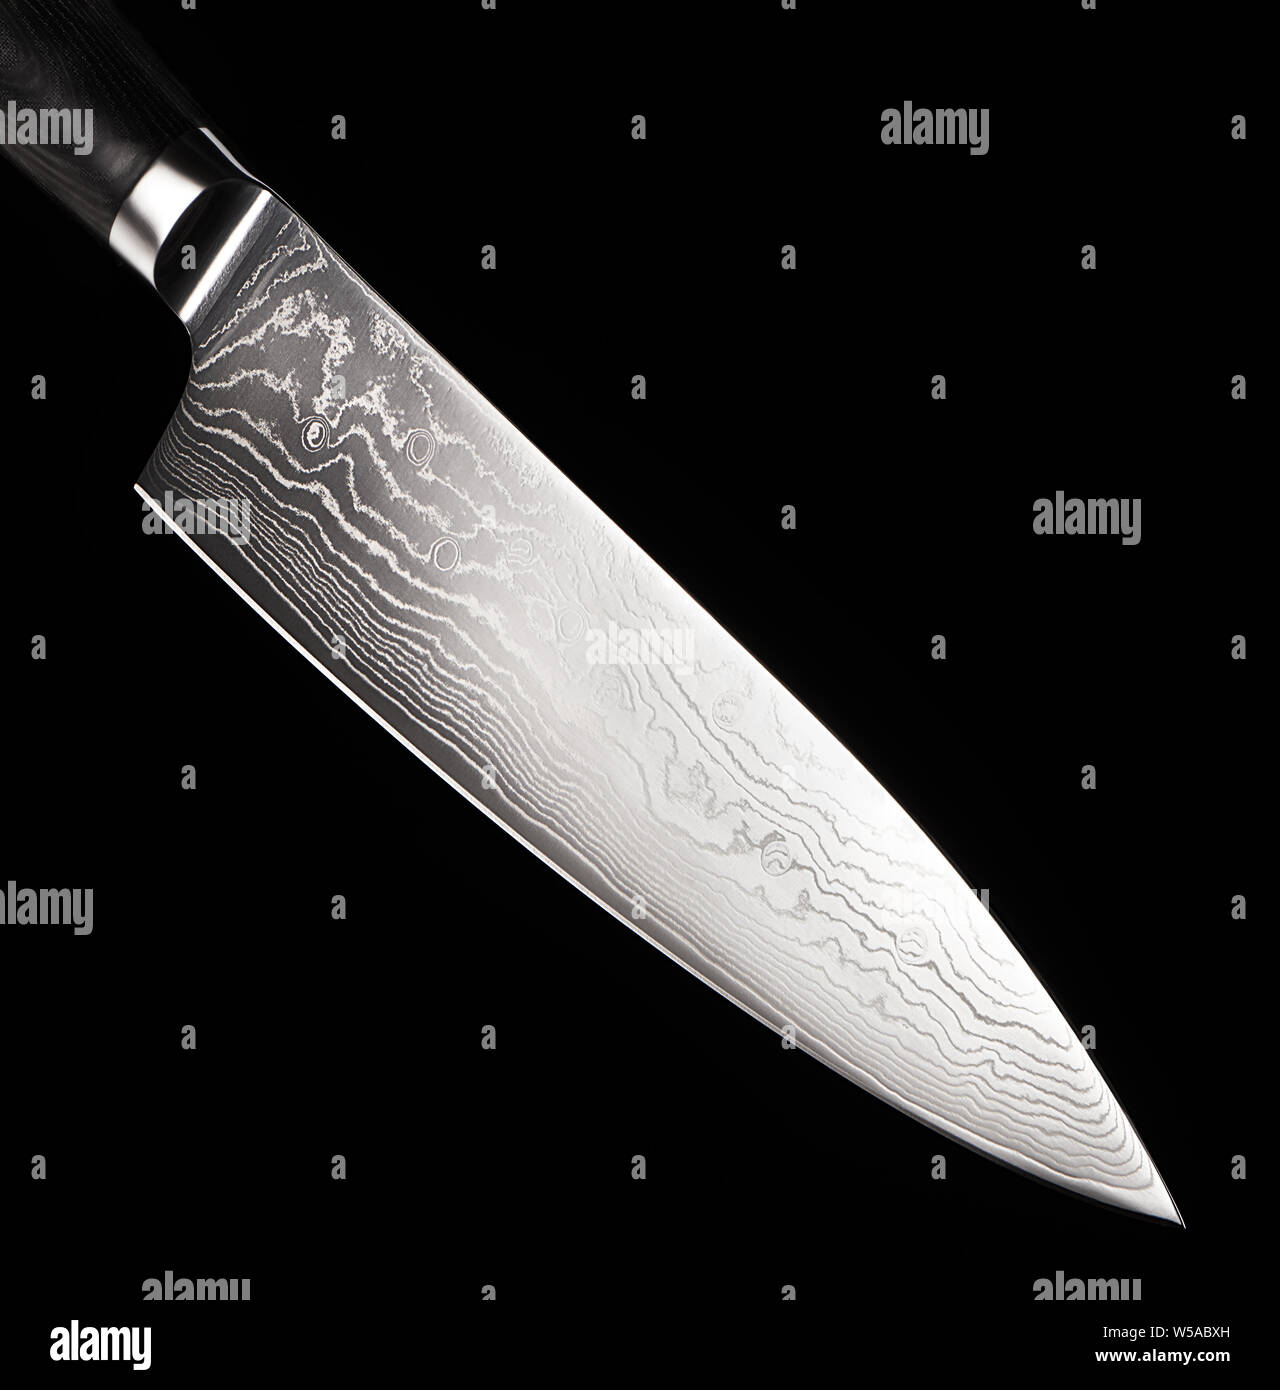 Close up of professional steel kitchen knife with black handle isolated on black background Stock Photo